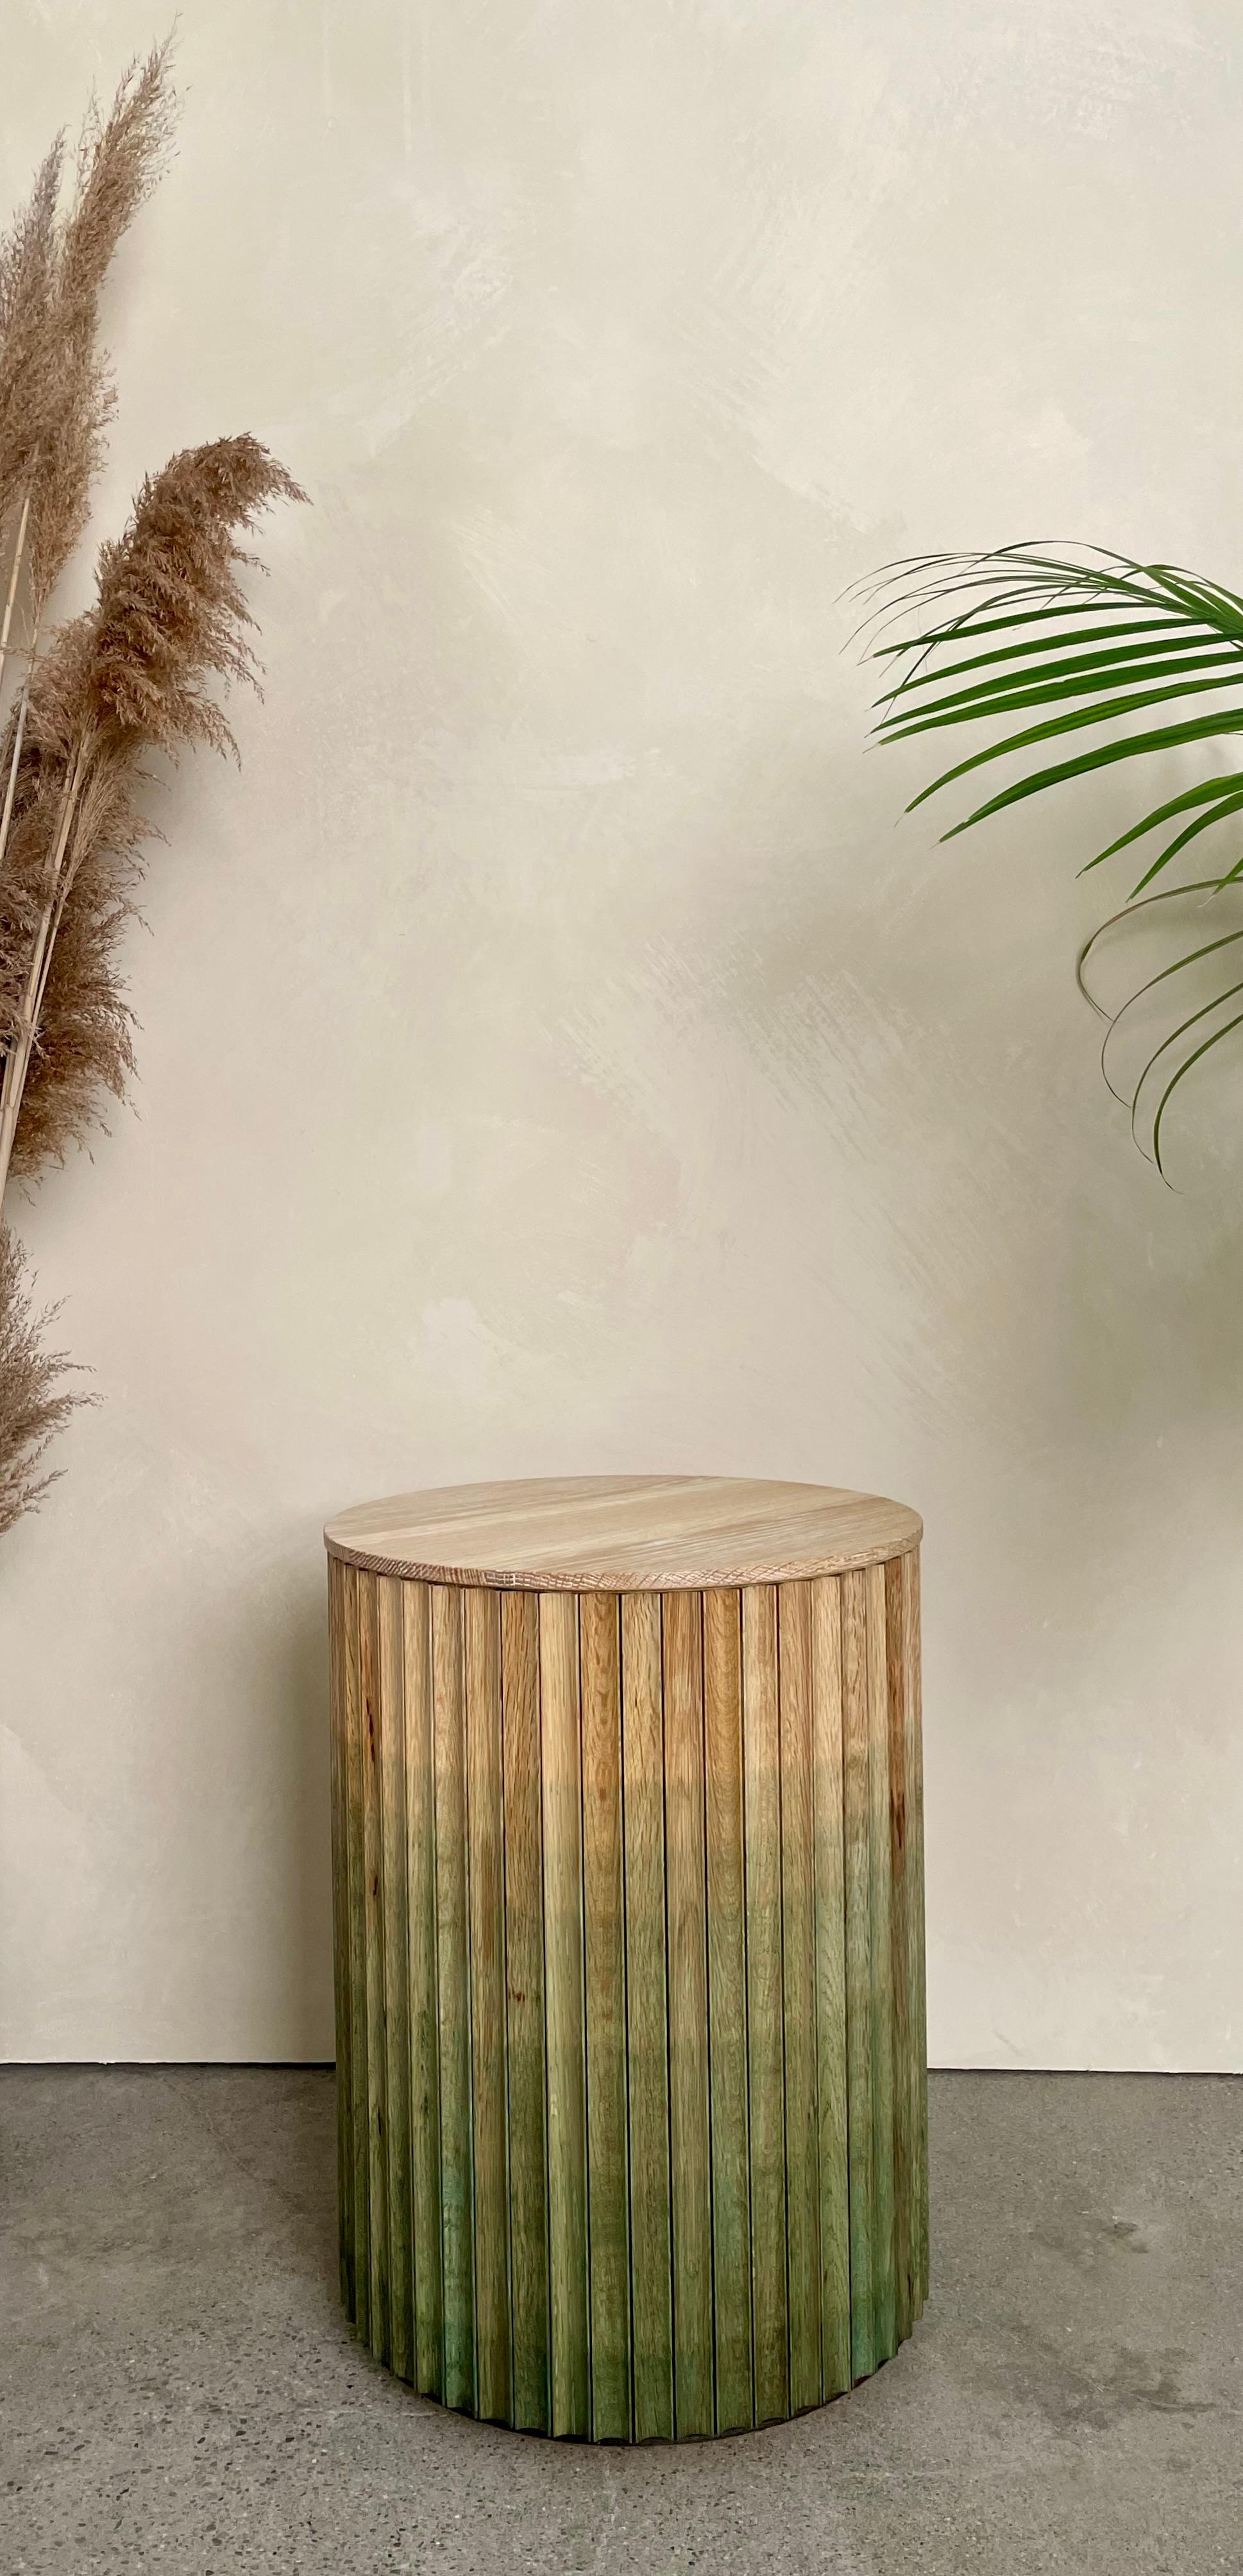 Made of solid American hardwoods, the Pilar Coffee, Occasional and End Tables provide both functionality and character in spaces such as a living room or hotel/office lobbies.   

With the ability to work in clusters or by themselves, they serve a